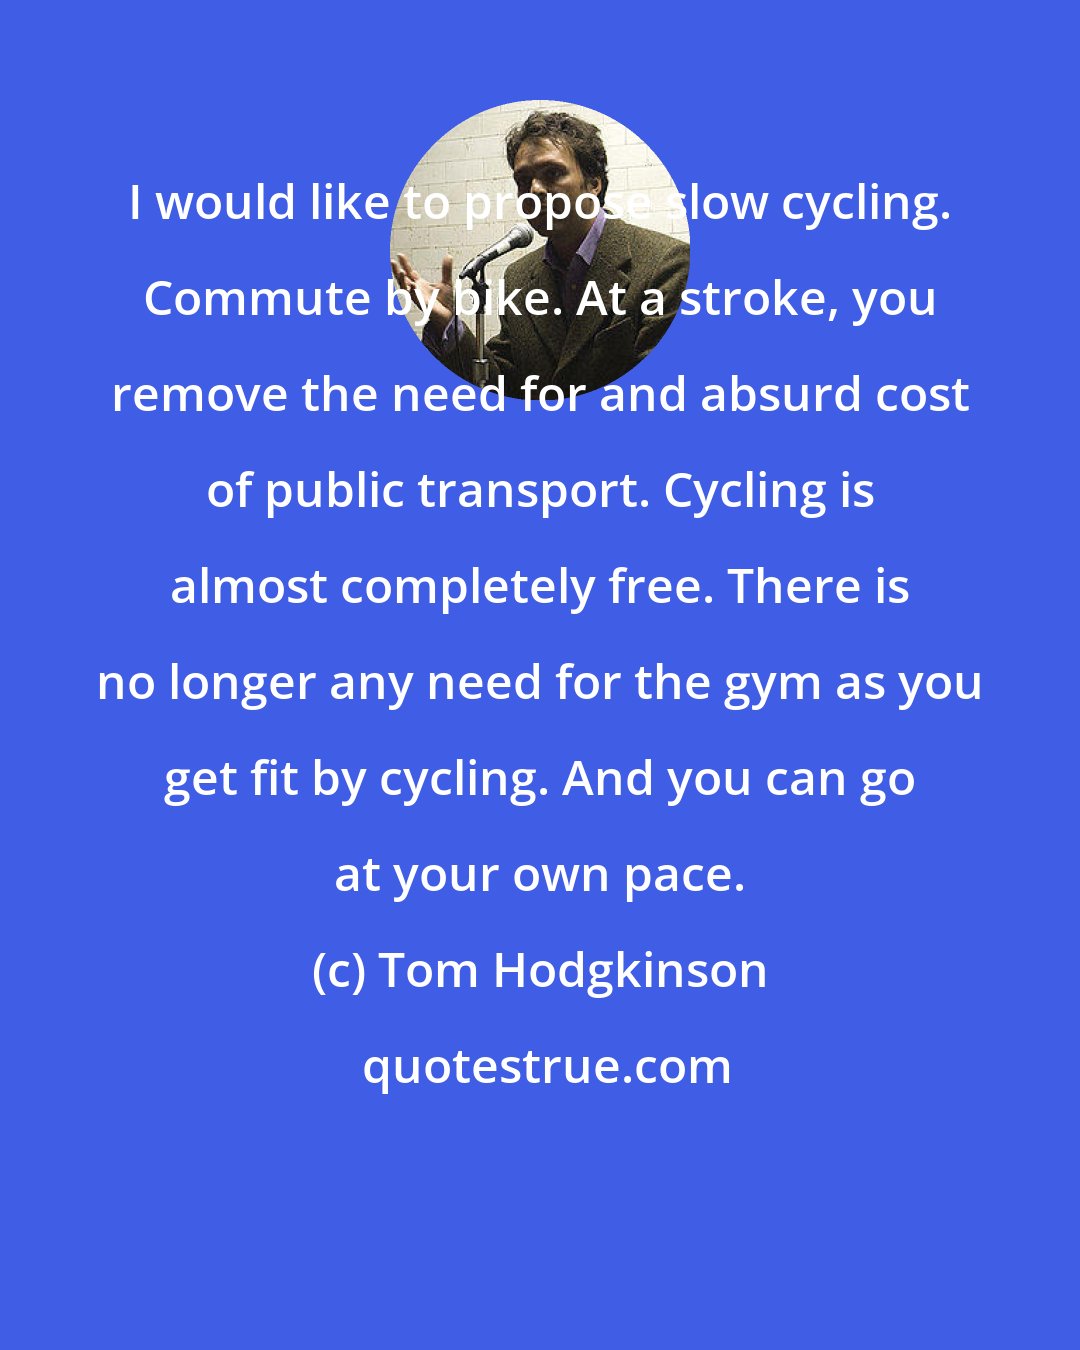 Tom Hodgkinson: I would like to propose slow cycling. Commute by bike. At a stroke, you remove the need for and absurd cost of public transport. Cycling is almost completely free. There is no longer any need for the gym as you get fit by cycling. And you can go at your own pace.